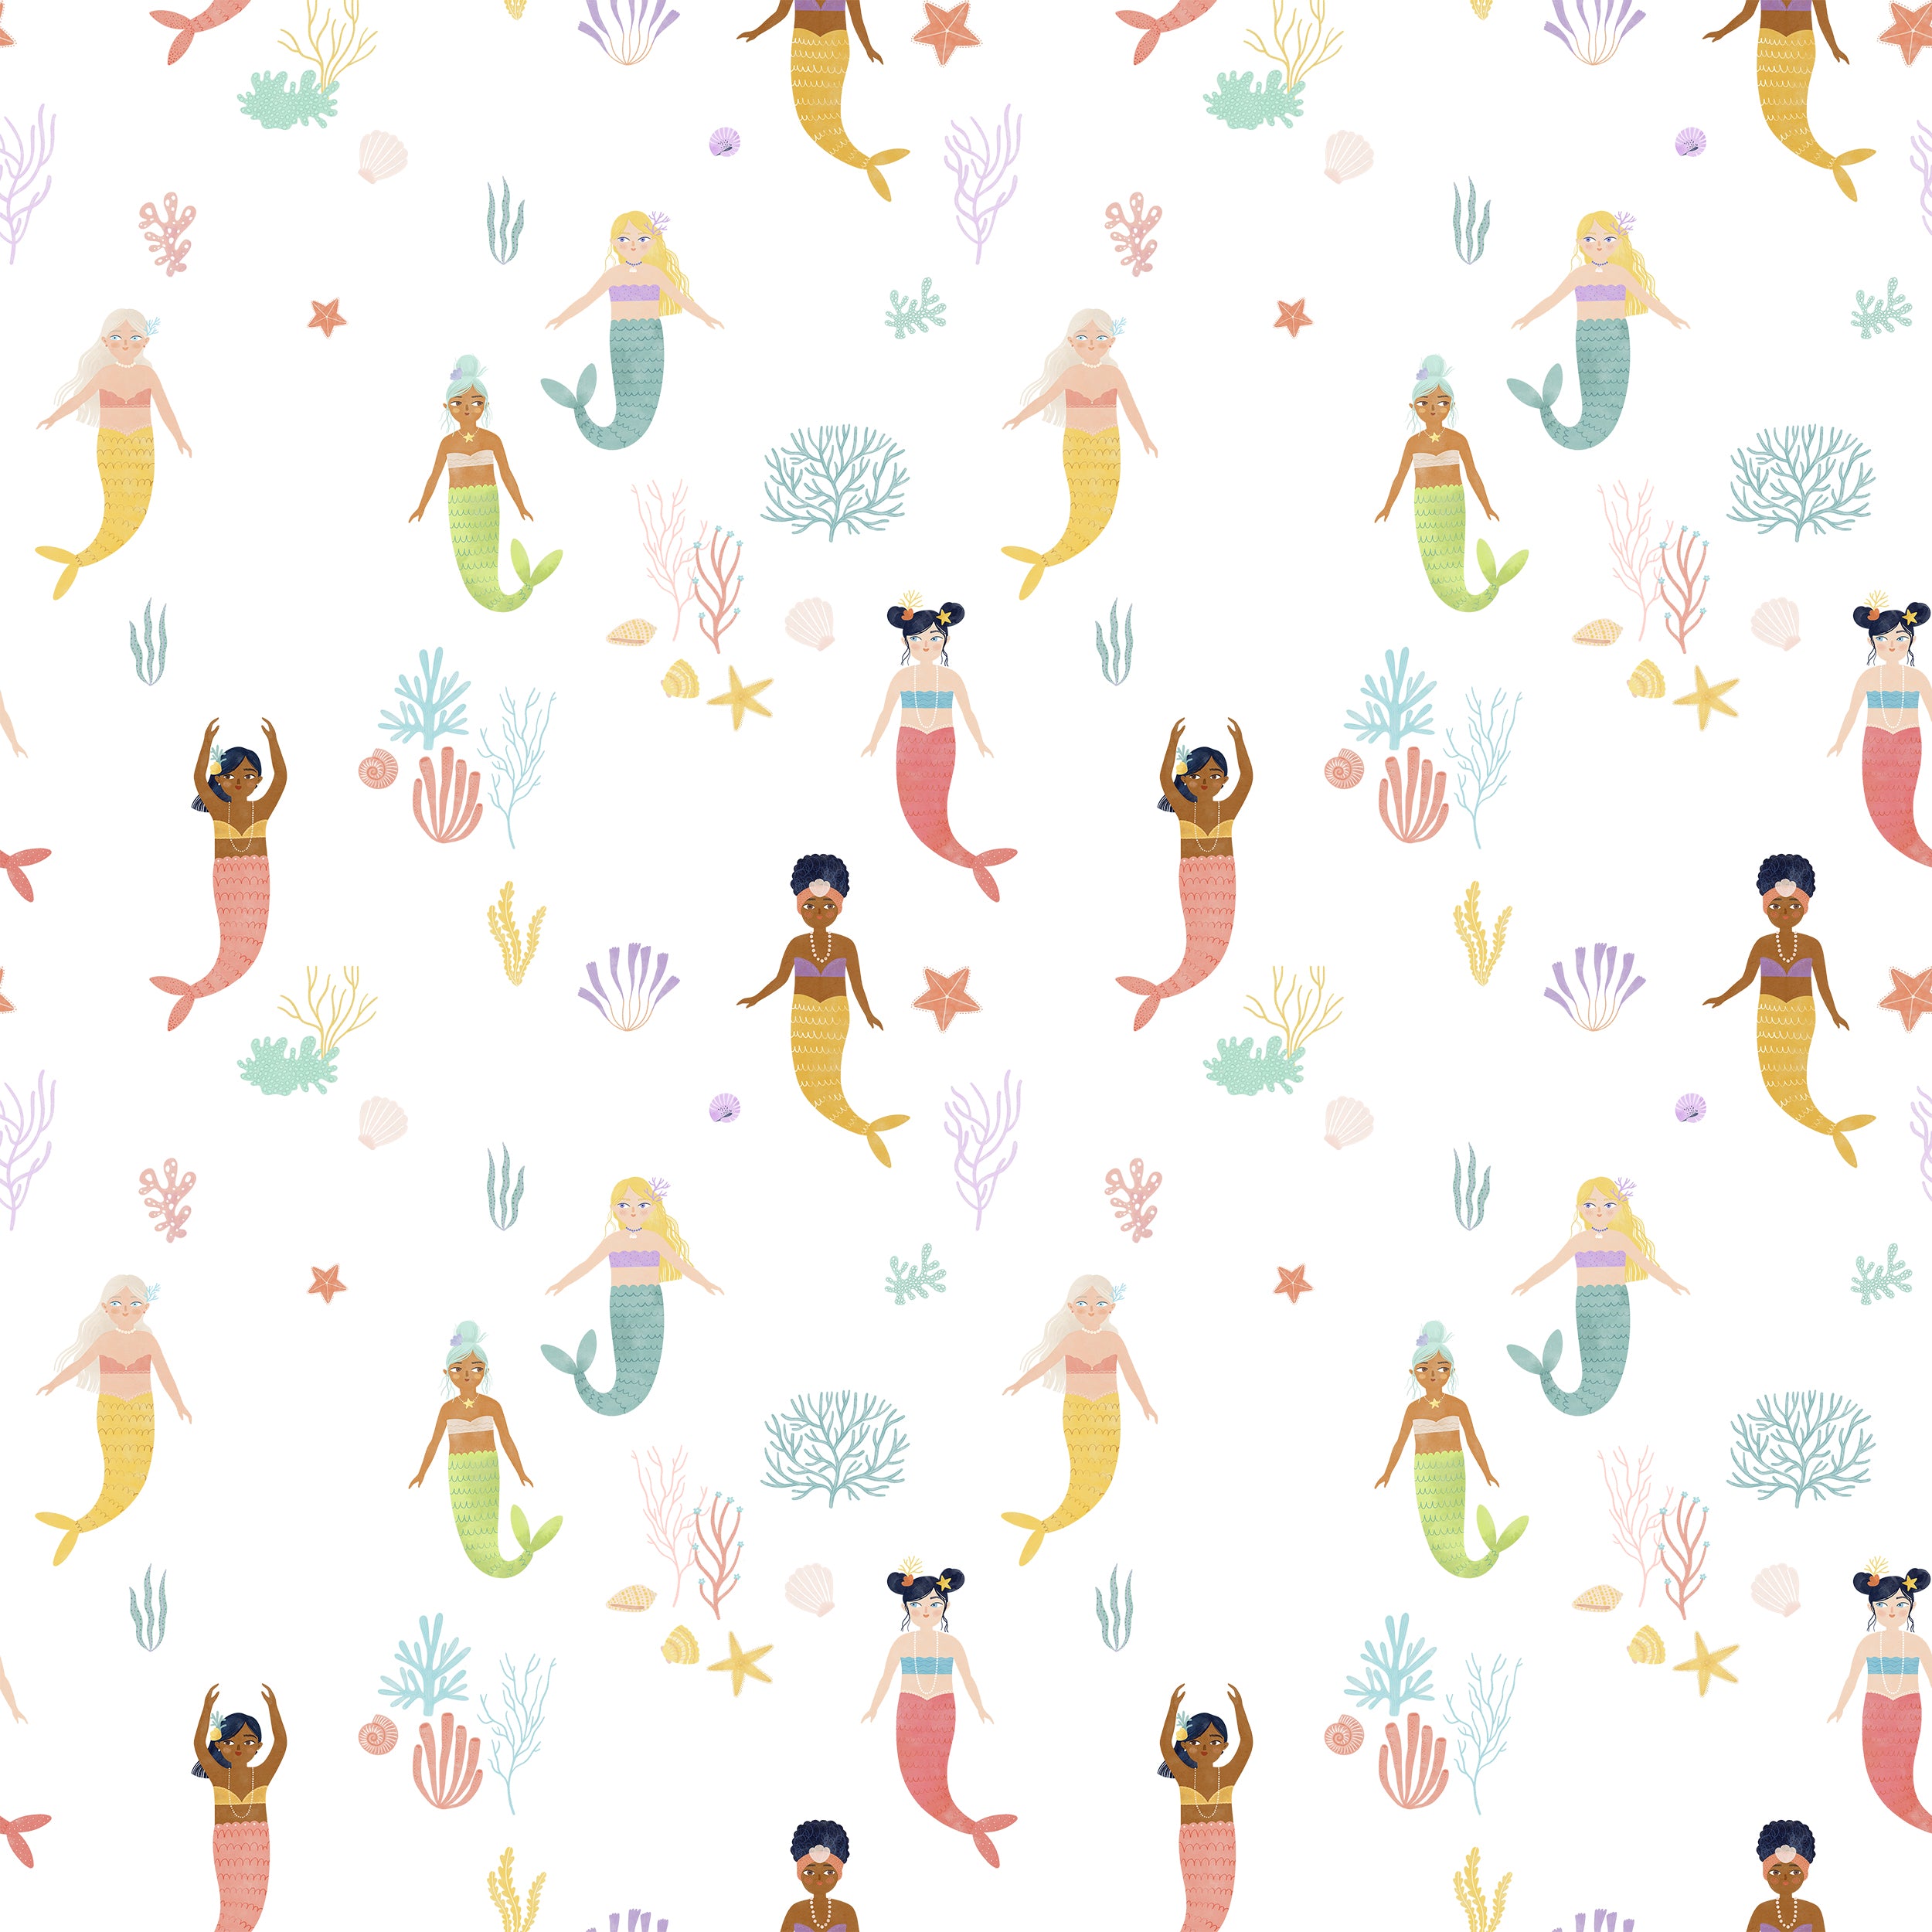 Detailed close-up of the Little Mermaids Wallpaper showcasing a colorful array of mermaids with diverse appearances and attire, set among oceanic plants and animals. This vibrant and inclusive design makes it perfect for adding a fantastical touch to any child's room